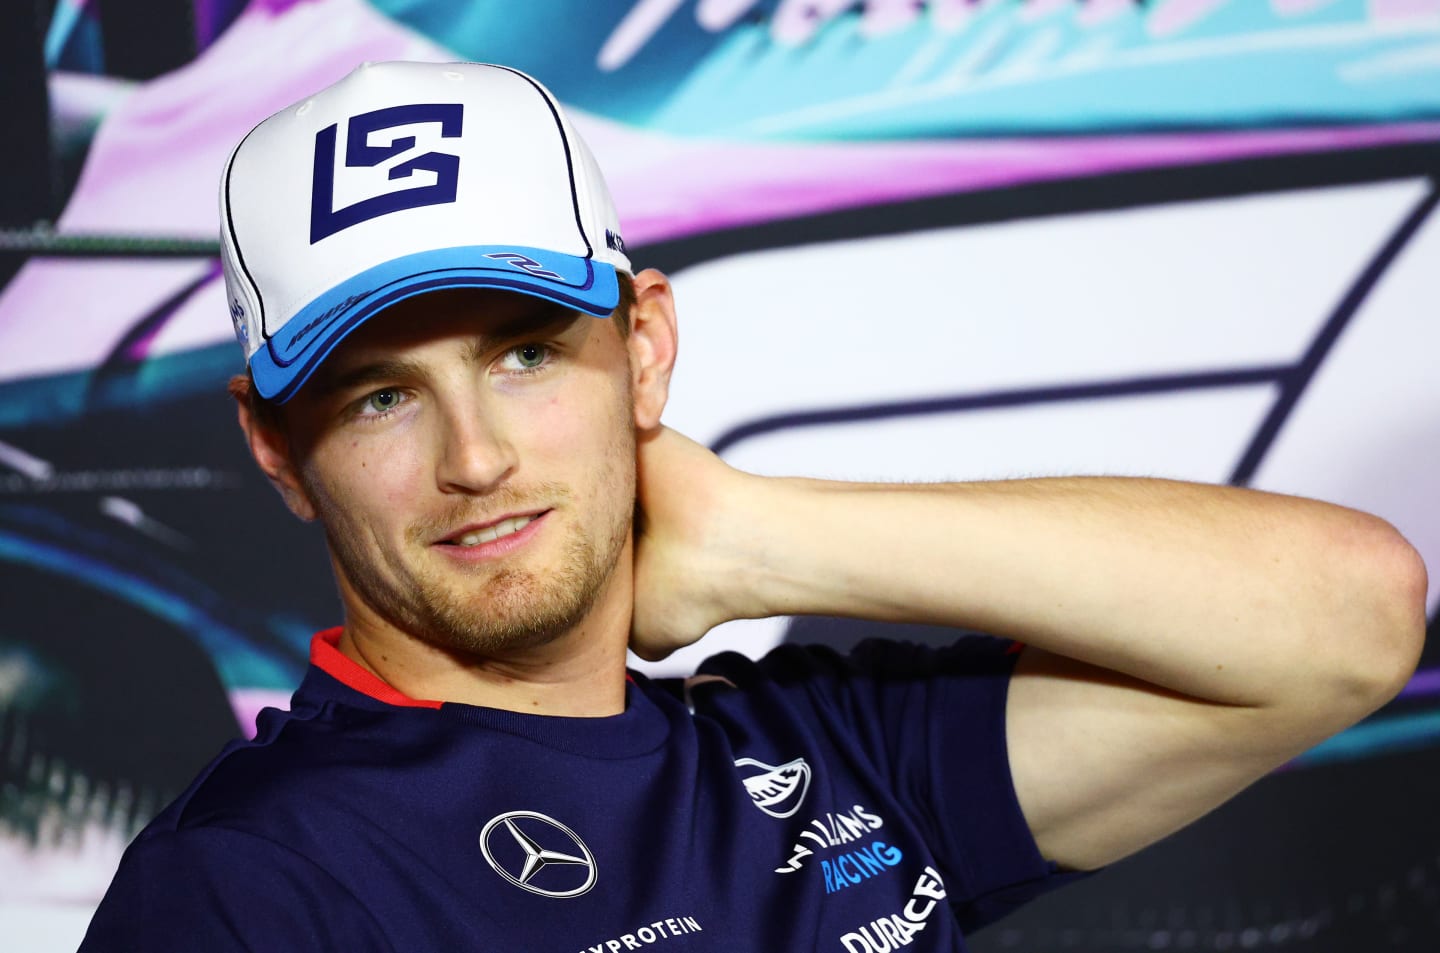 MIAMI, FLORIDA - MAY 02: Logan Sargeant of United States driving the (2) Williams FW46 Mercedes attends the Drivers Press Conference during previews ahead of the F1 Grand Prix of Miami at Miami International Autodrome on May 02, 2024 in Miami, Florida. (Photo by Clive Rose/Getty Images)